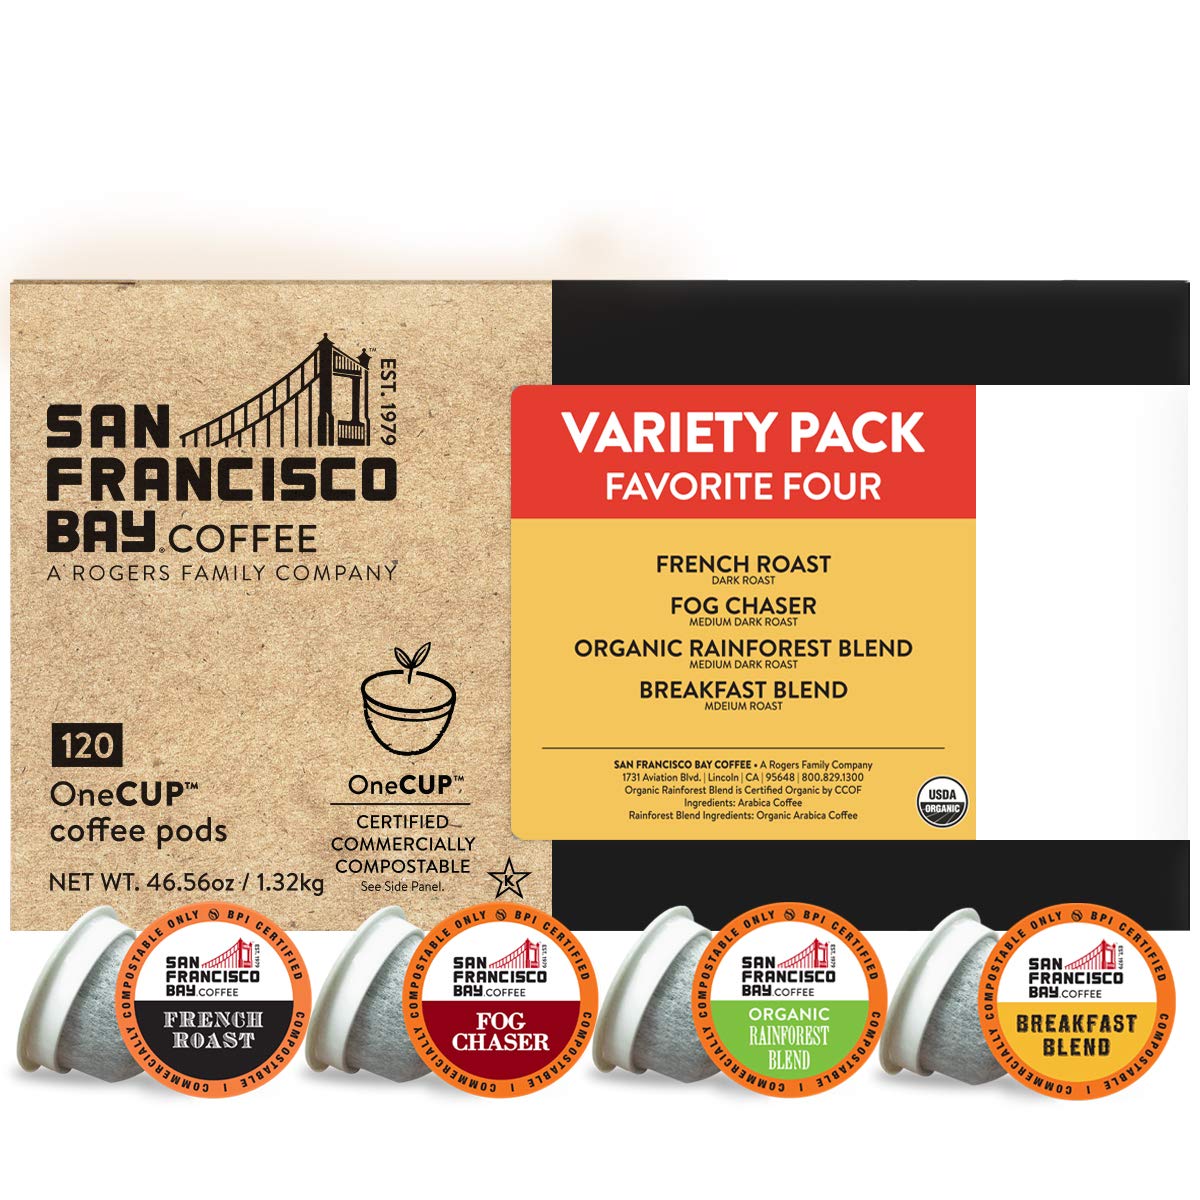 San Francisco Bay Compostable Coffee Pods - Original Variety Pack (120 Ct) K Cup Compatible including Keurig 2.0, French, Breakfast, Fog, Organic Rainforest,120 Count (Pack of 1)